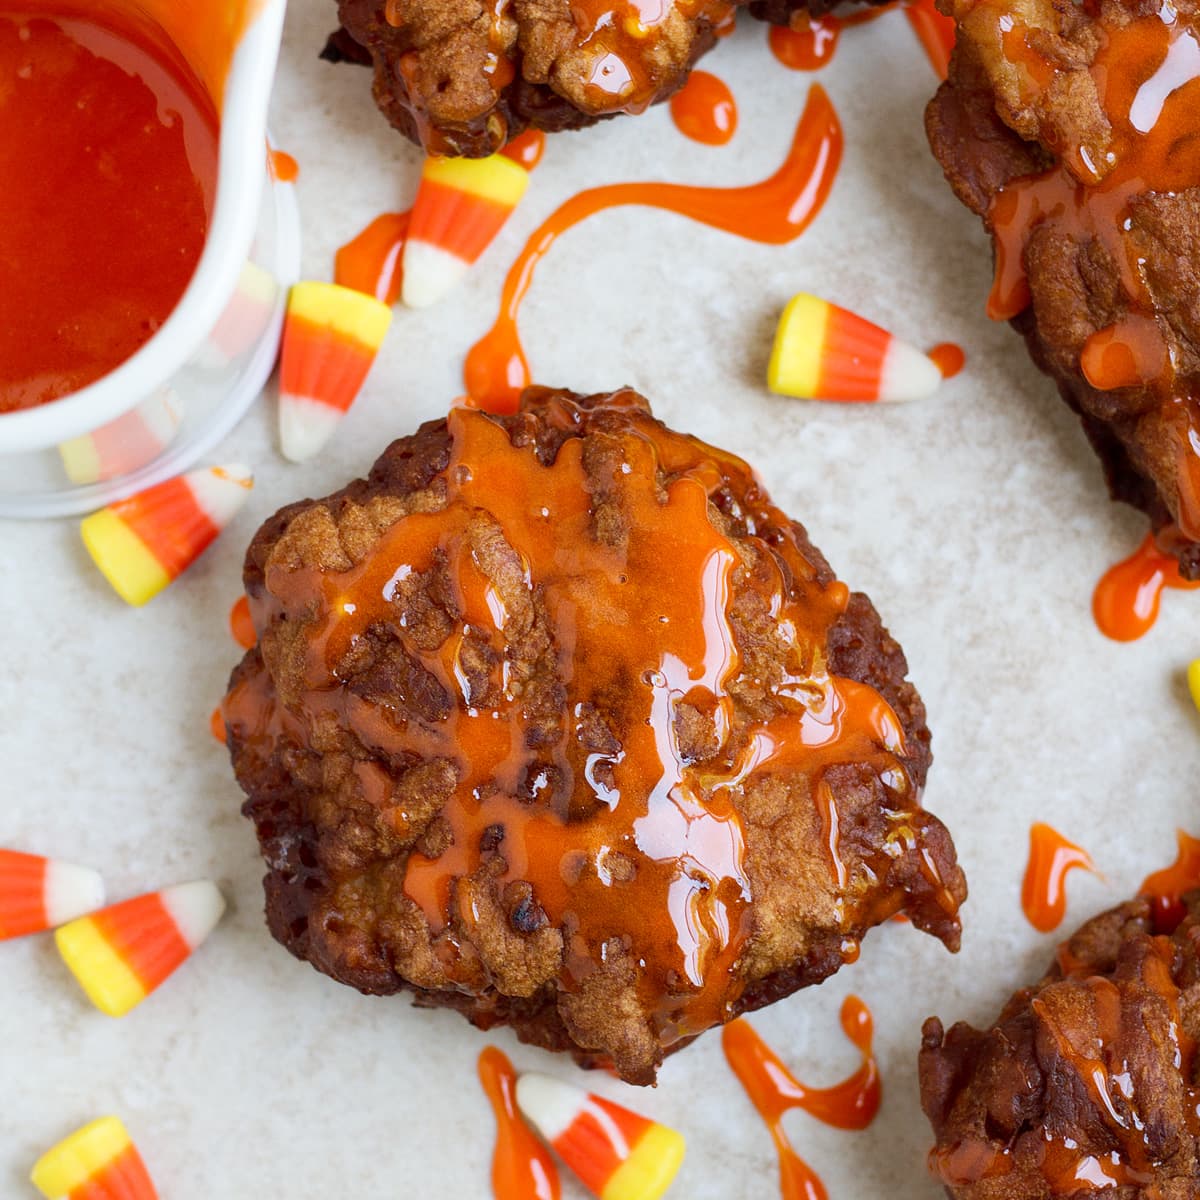 Candy corn glaze on fried fritters.